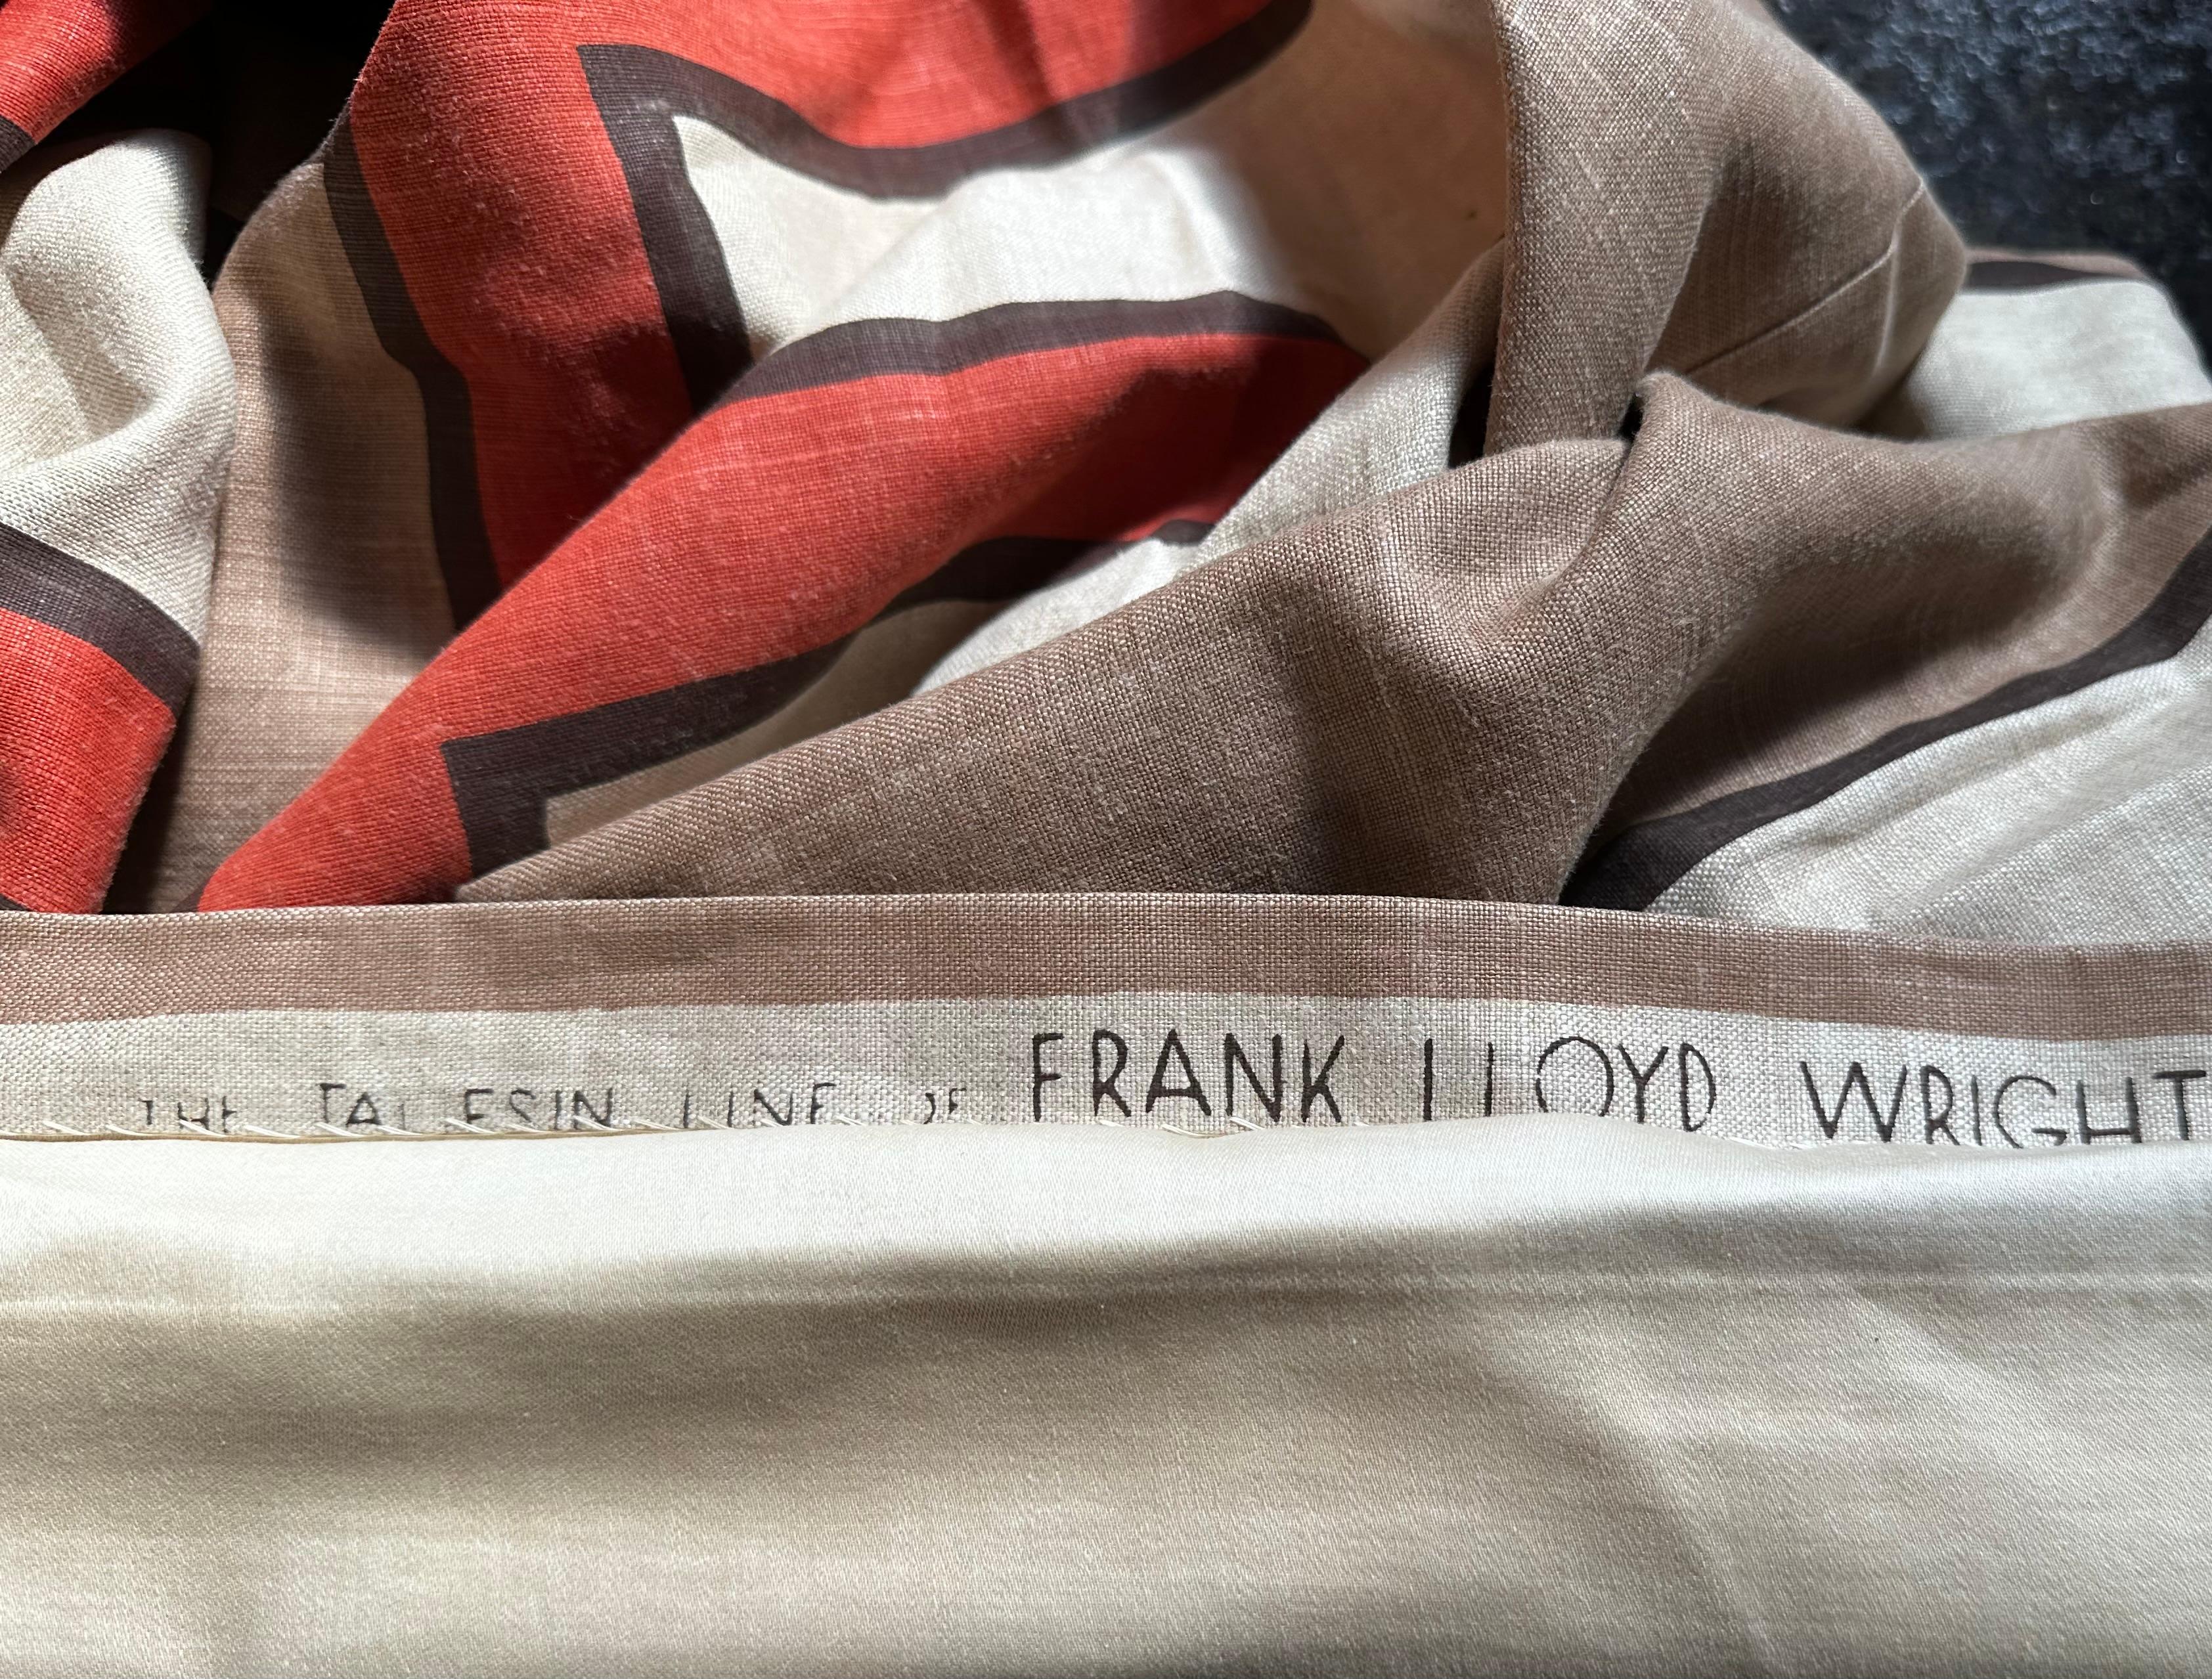 Frank Lloyd Wright Design 103: Brown Wood & Brick Extended Curtain Panel, Lined. For Sale 1